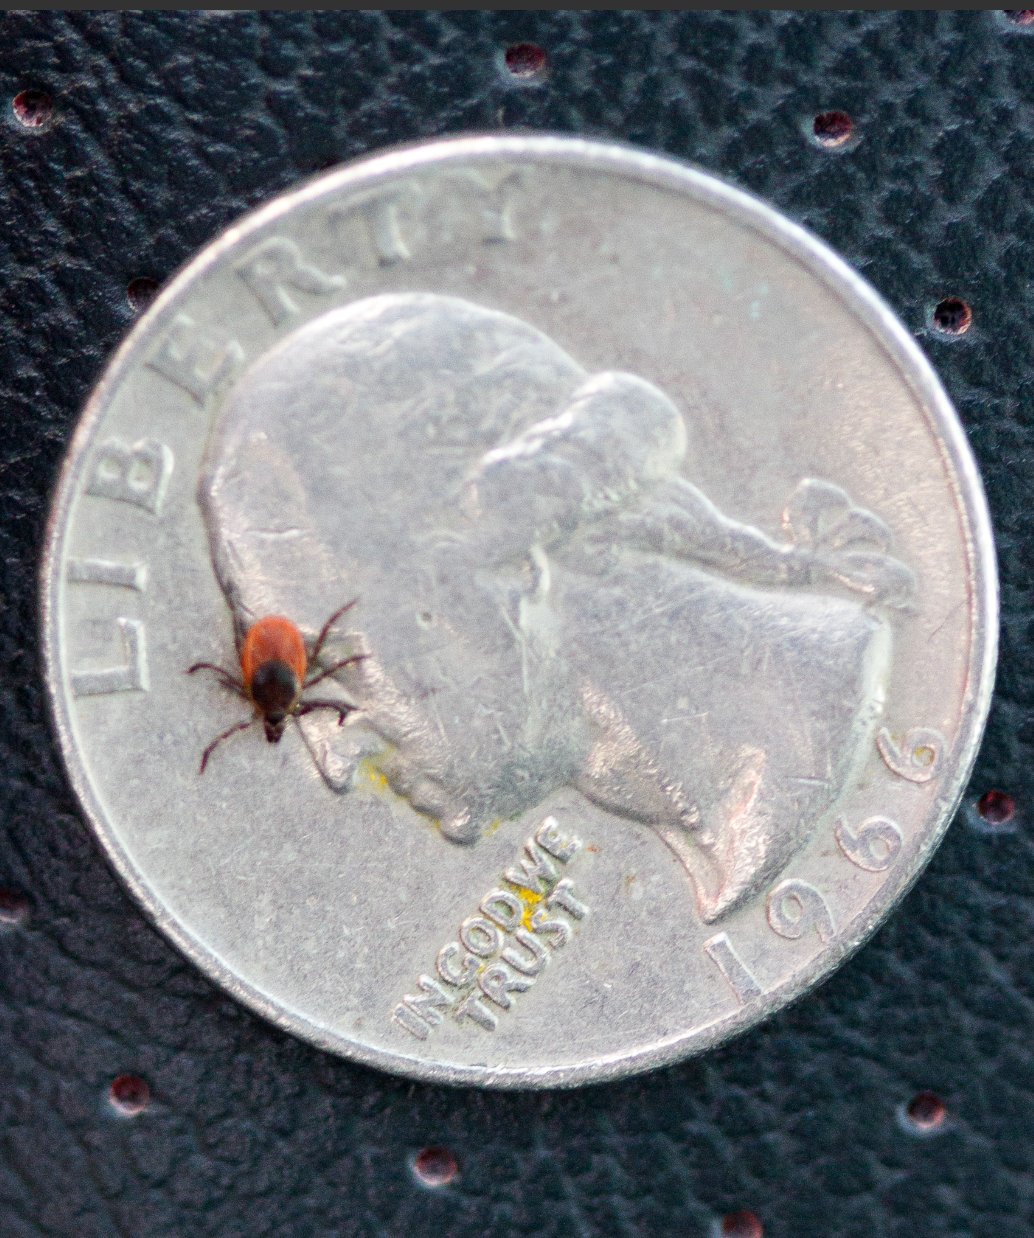 Tiny deer ticks can transfer Lyme disease from mice and deer to humans.